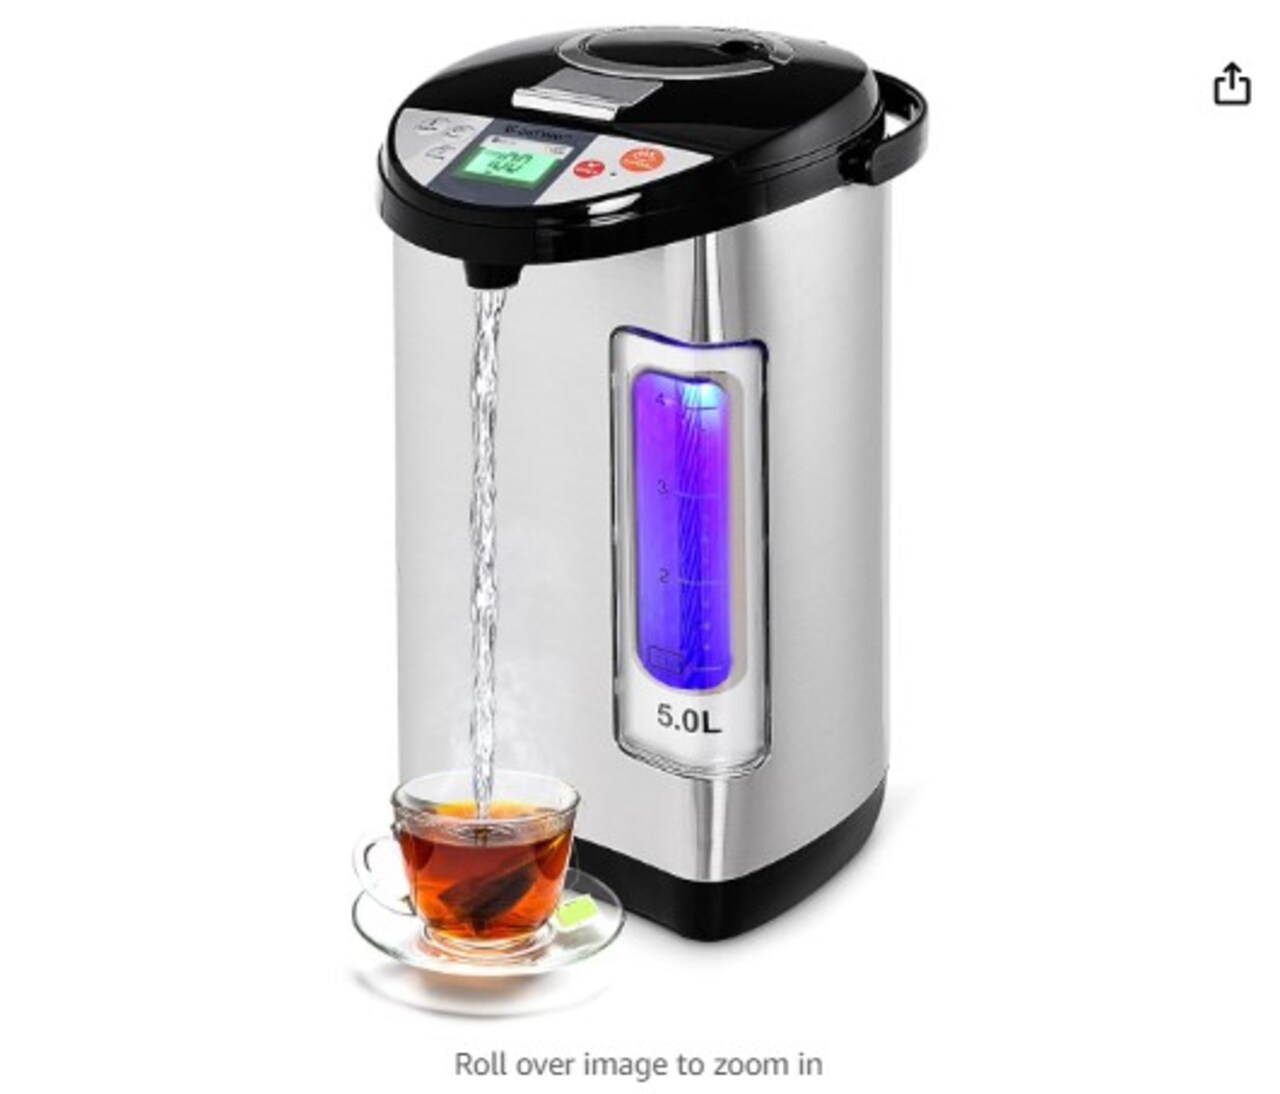 Instant Electric Hot Water Boiler and Warmer, 5-Liter LCD Water Pot with 5  Stage Temperature Settings, Spill-Resistant Safety Lock, Stainless Steel Hot  Water Dispenser